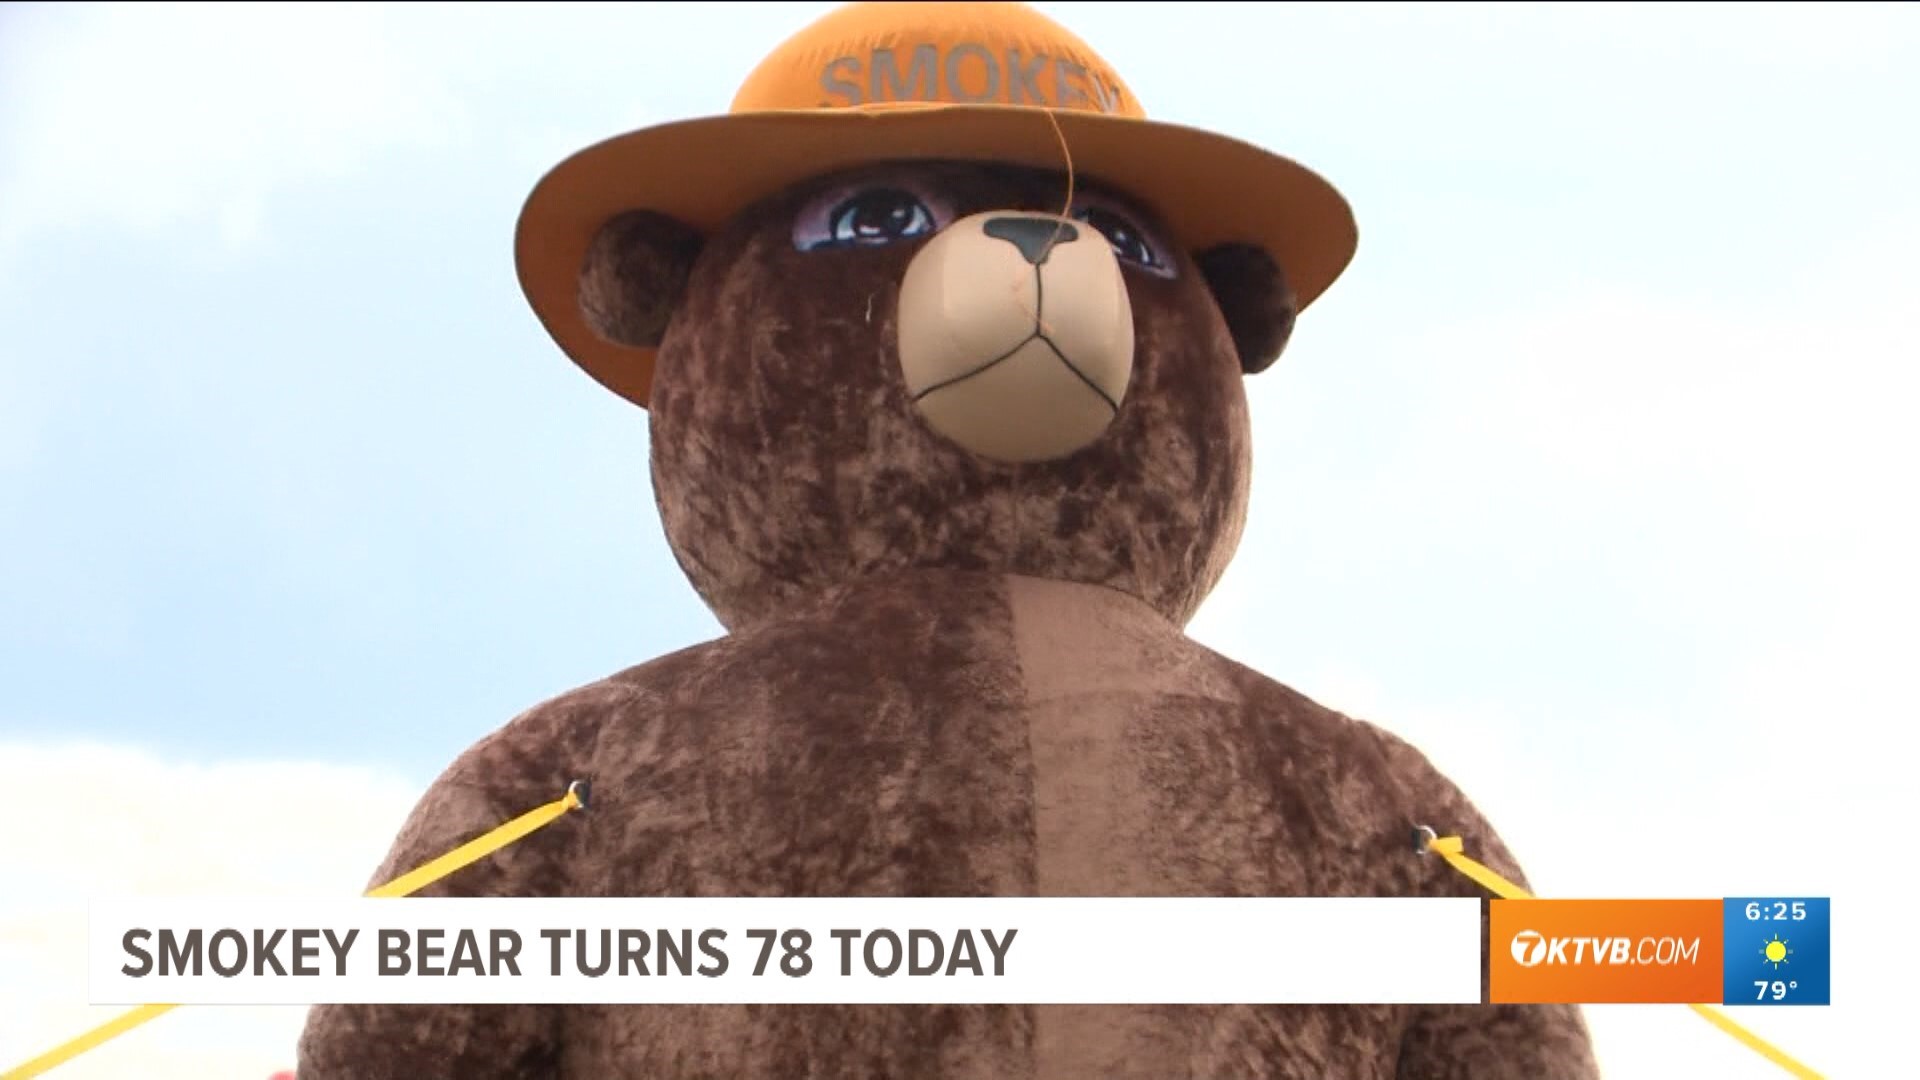 The U.S. Forest Service and AdCouncil created the character, inspired by a real bear, in 1944 for fire prevention campaigns. Celebrations are happening Tuesday.